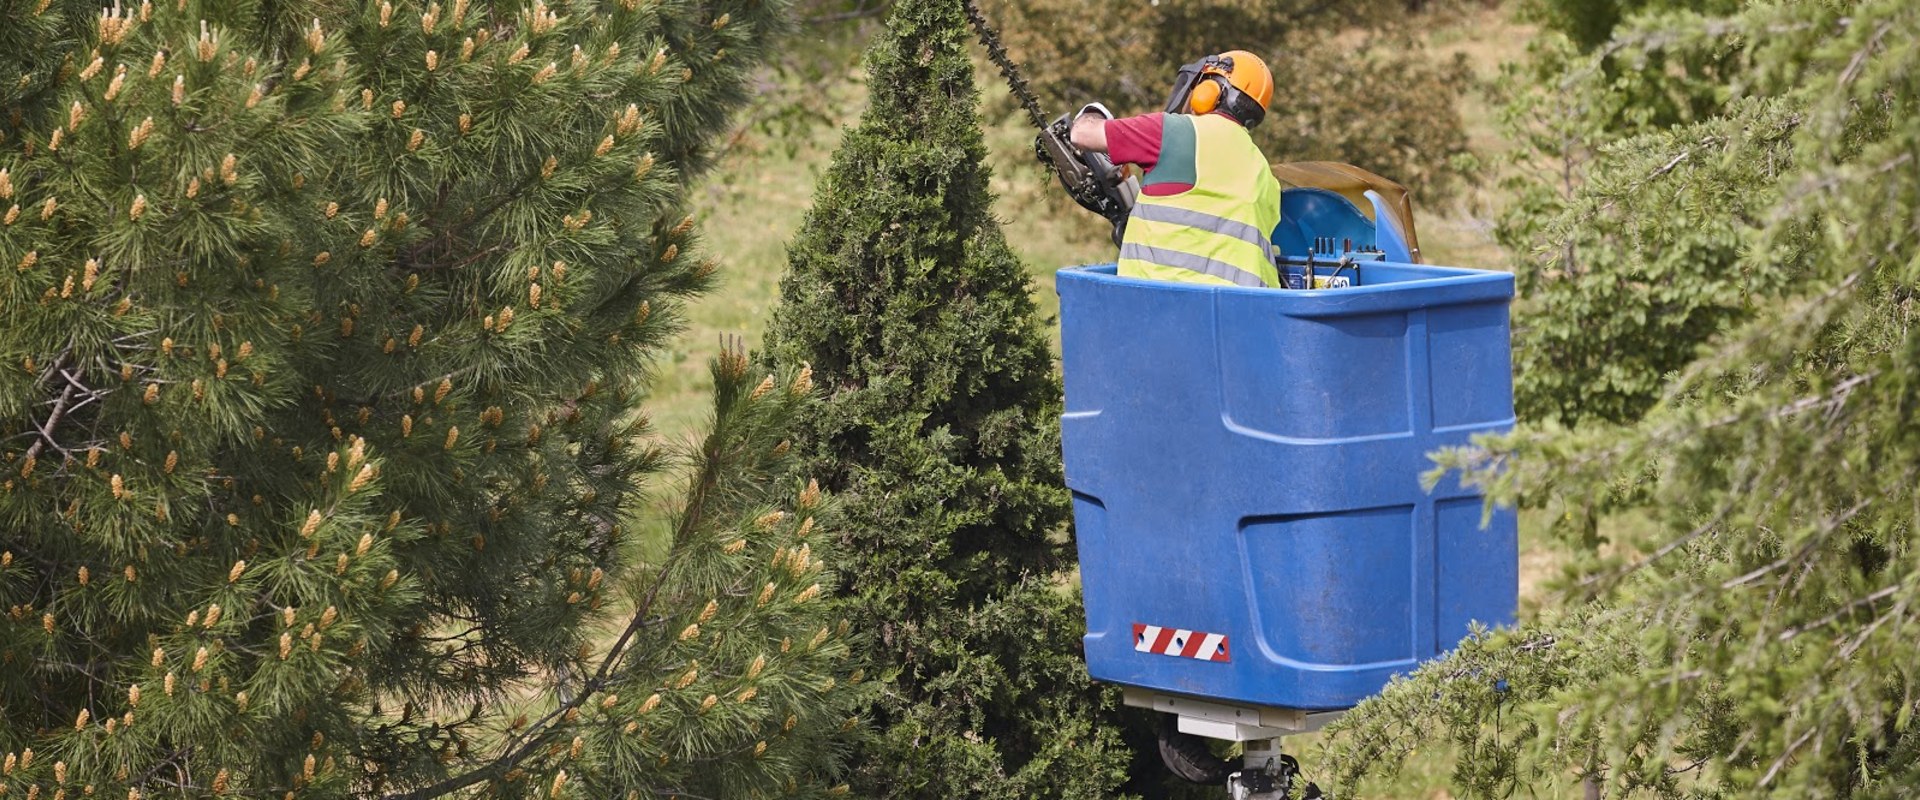 Tree Trimming: All You Need to Know